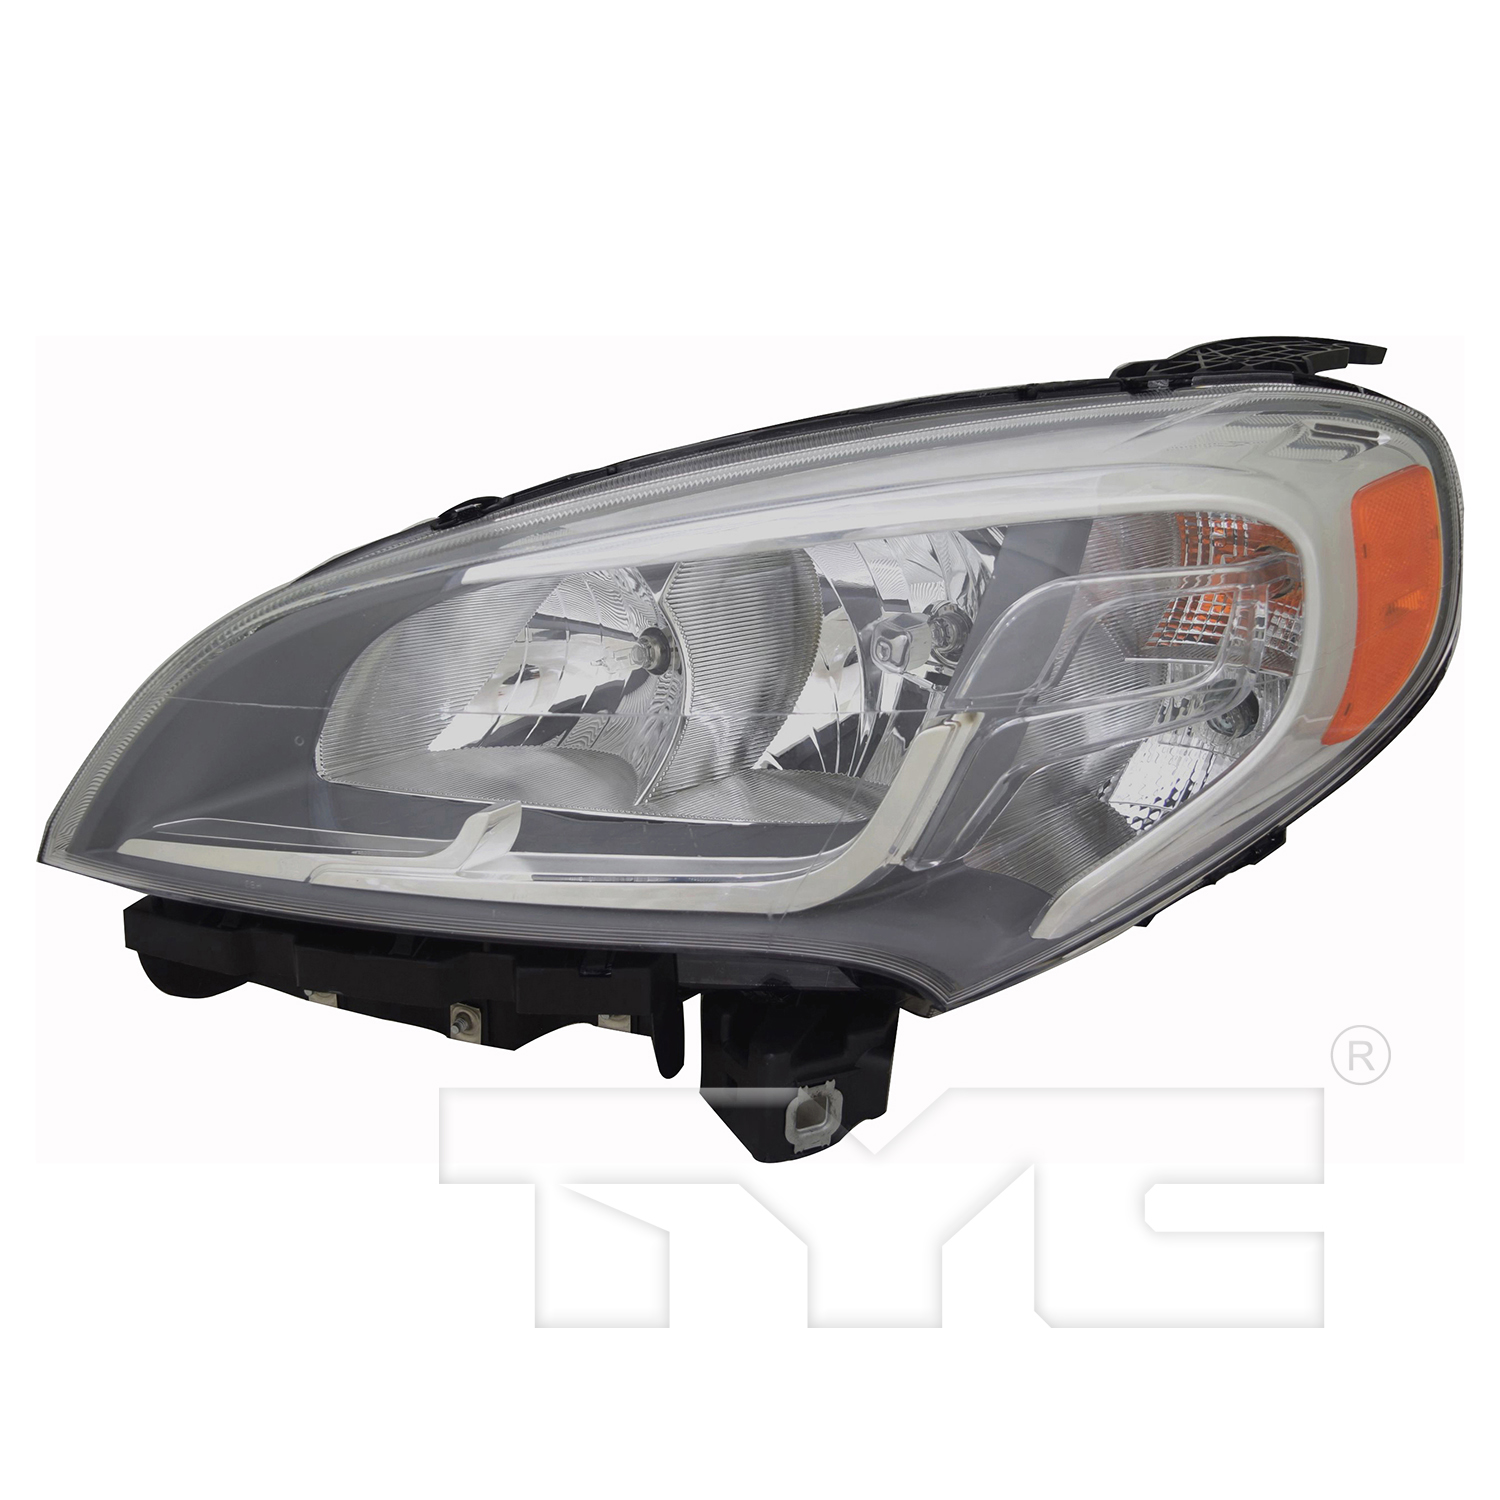 Aftermarket HEADLIGHTS for RAM - PROMASTER CITY, PROMASTER CITY,15-22,LT Headlamp assy composite